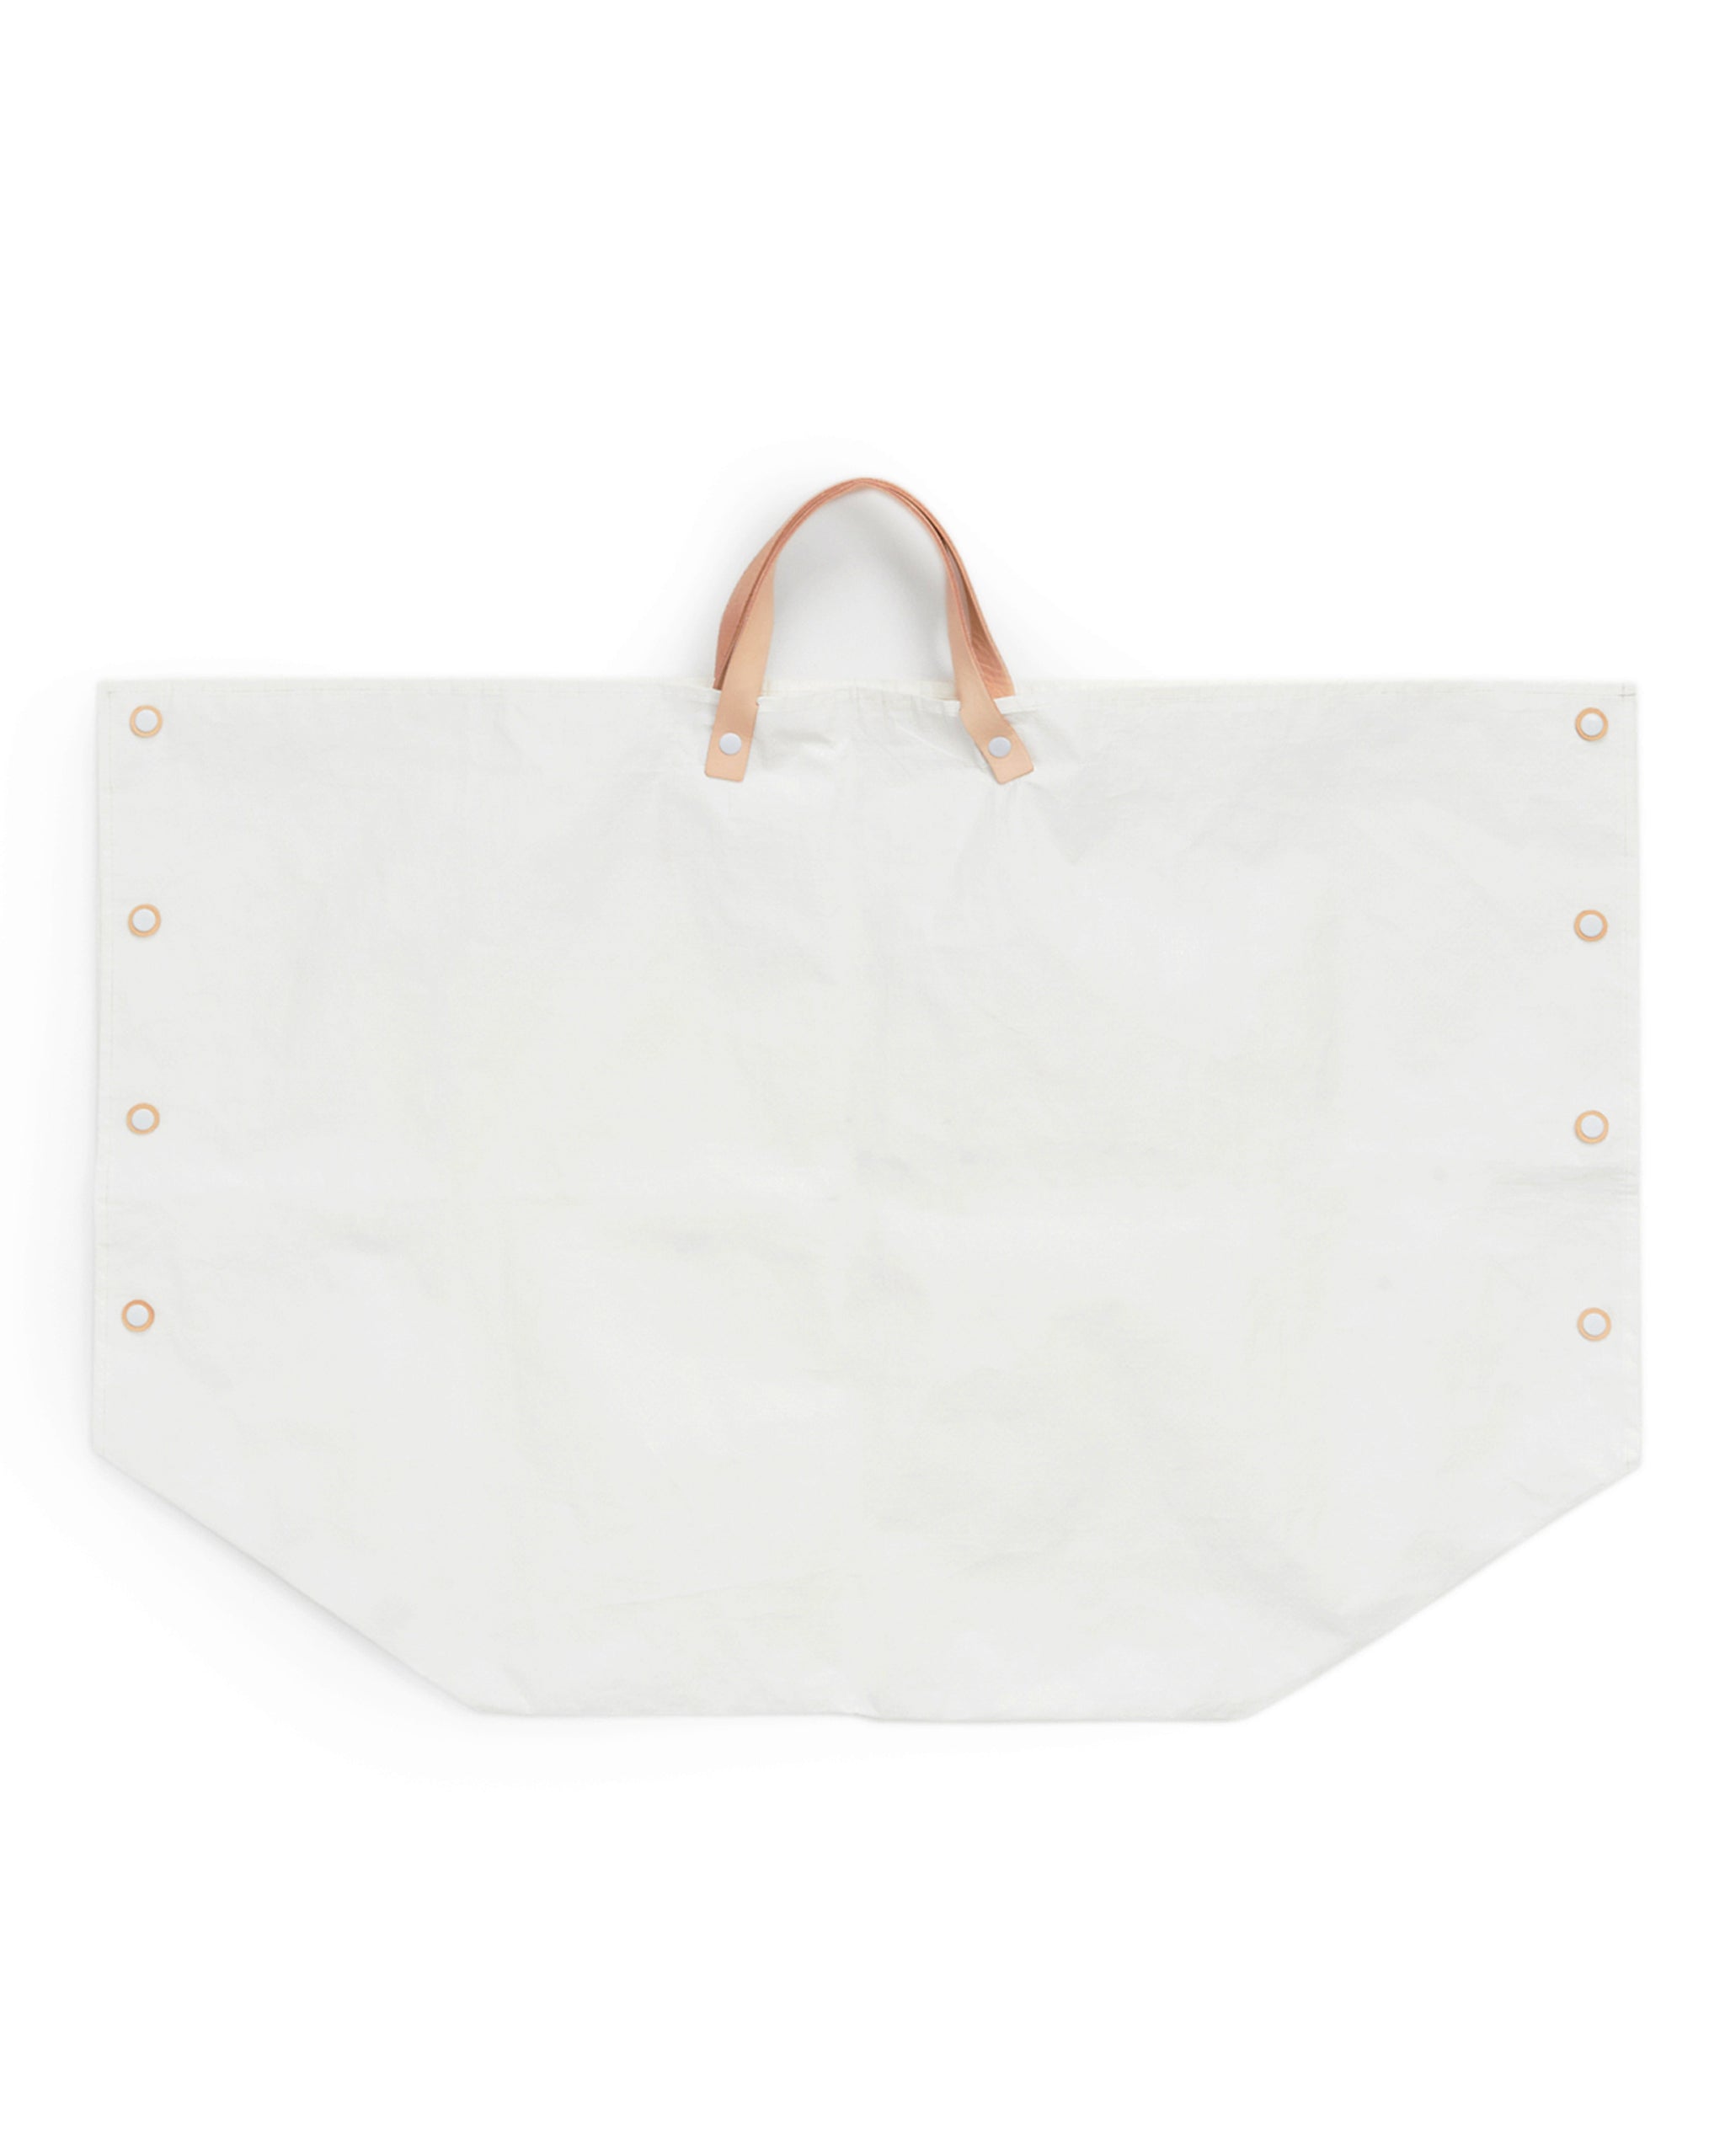 Silhouetted hender scheme picnic bag for family against white background.